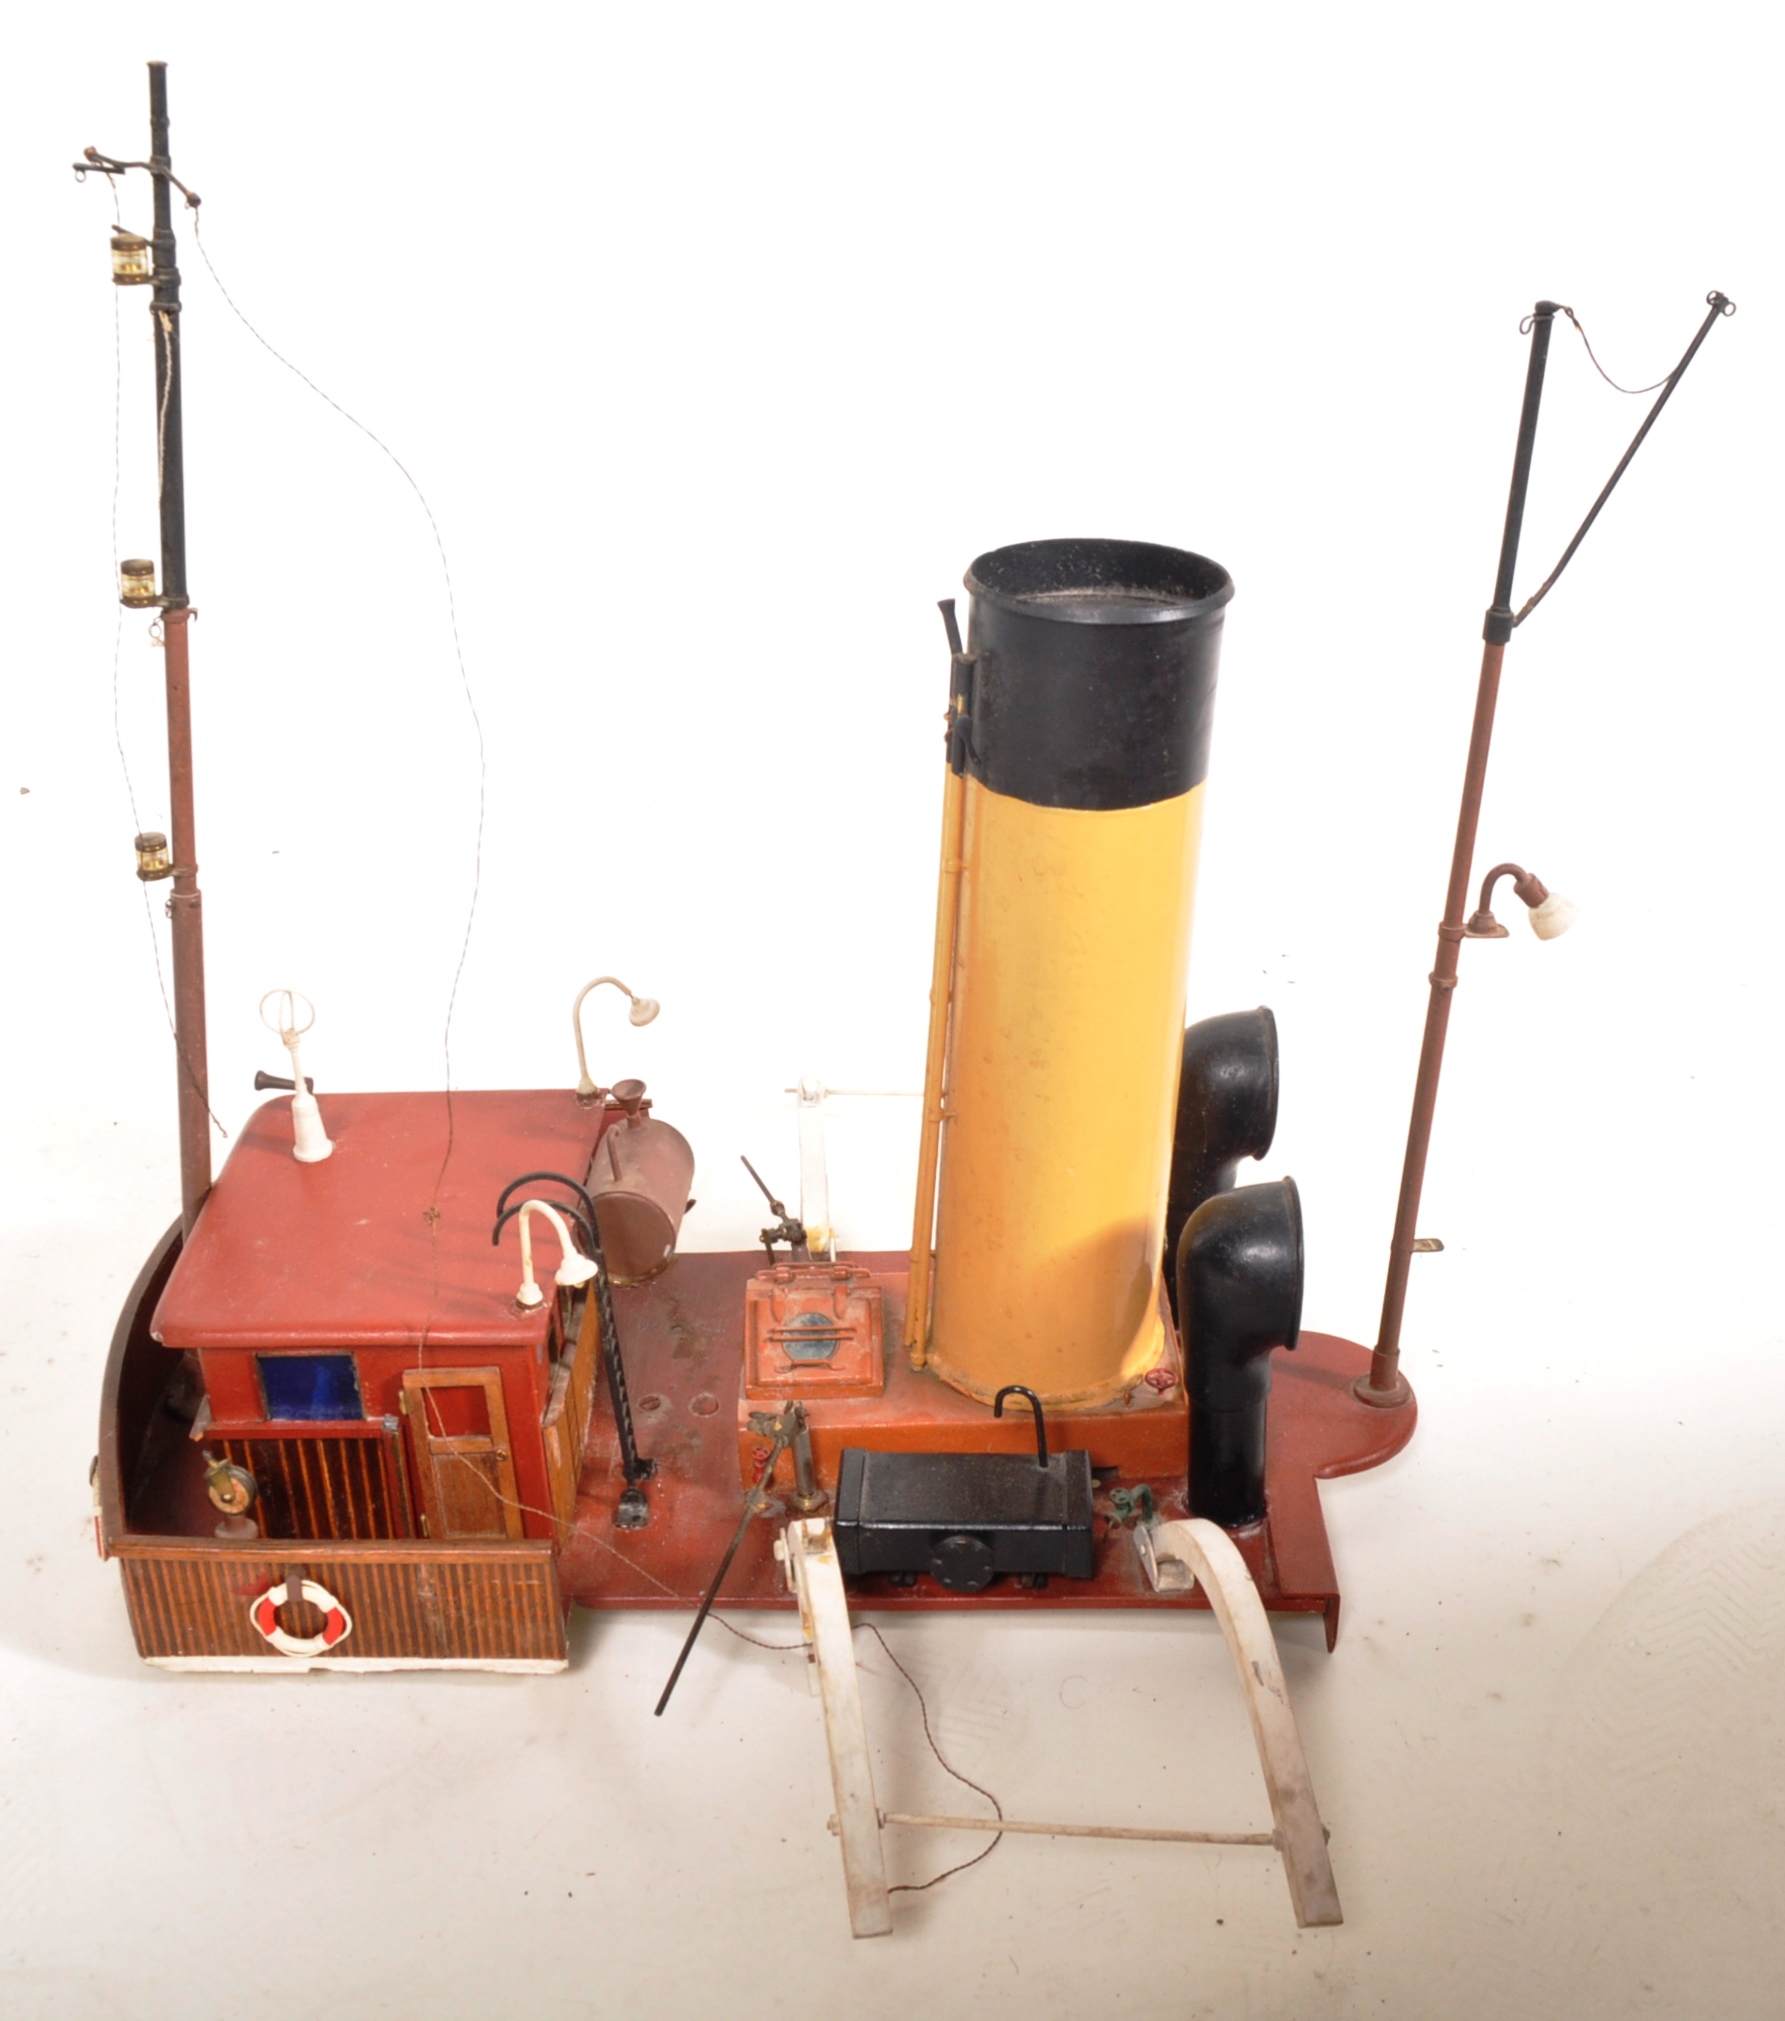 20TH CENTURY SCRATCH BUILT MODEL OF A 19TH CENTURY TUG BOAT - Image 9 of 9